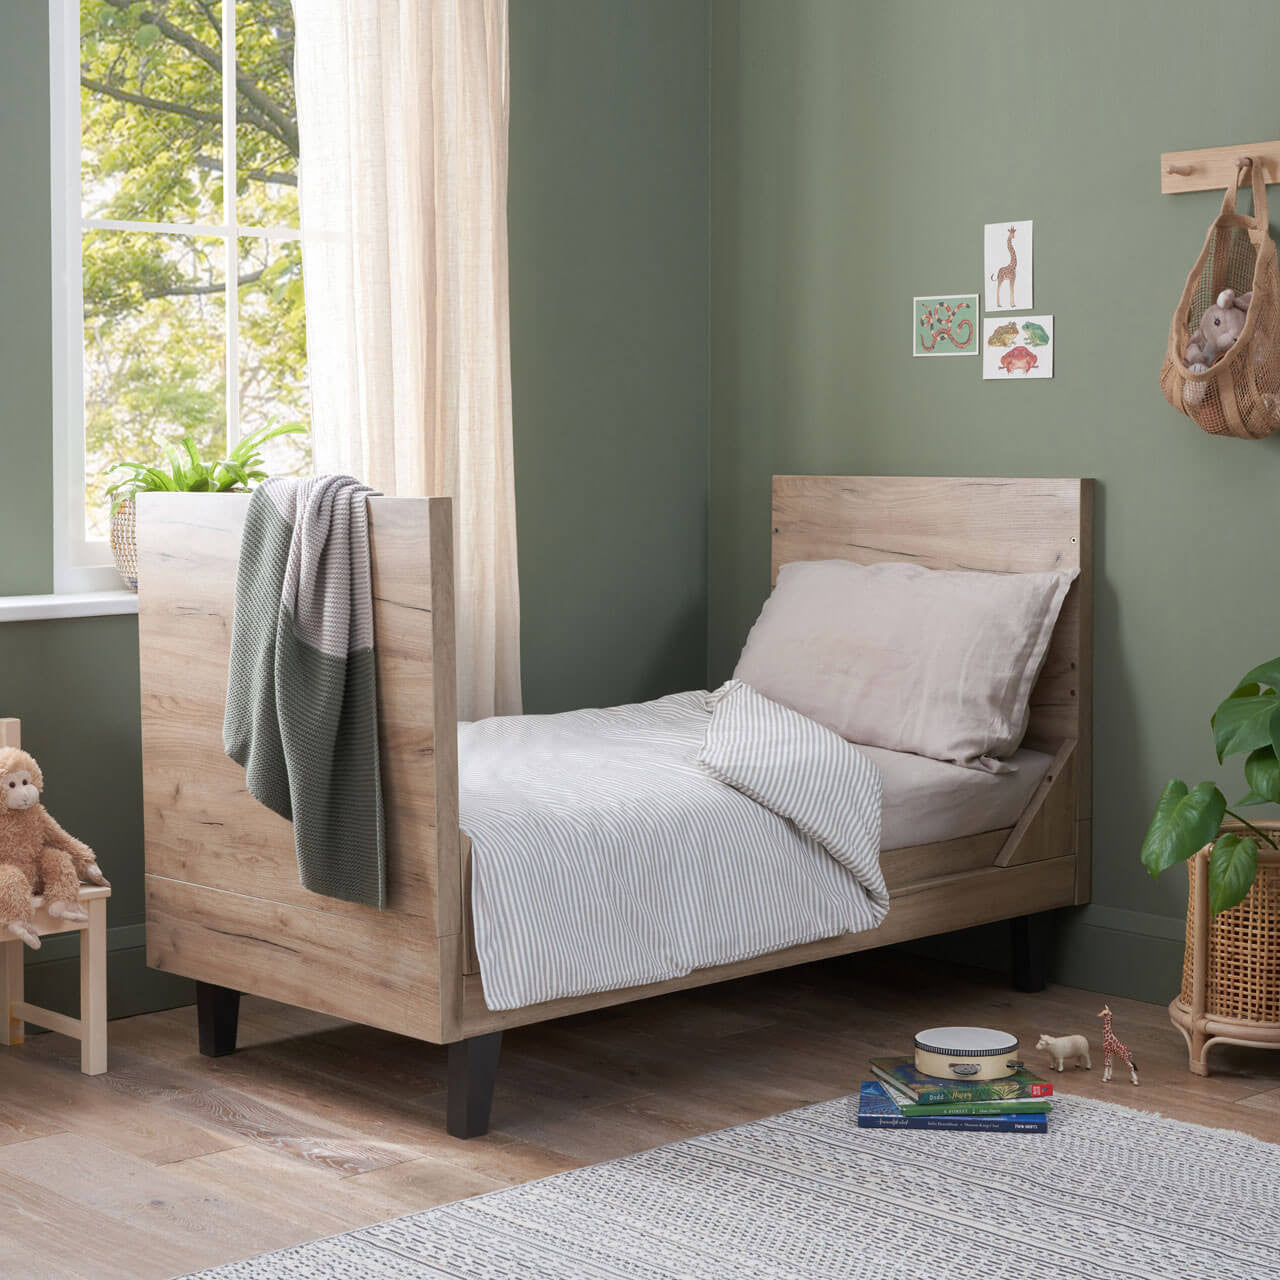 Tutti Bambini Como Cot Bed - Distressed Oak / Slate Grey -  | For Your Little One